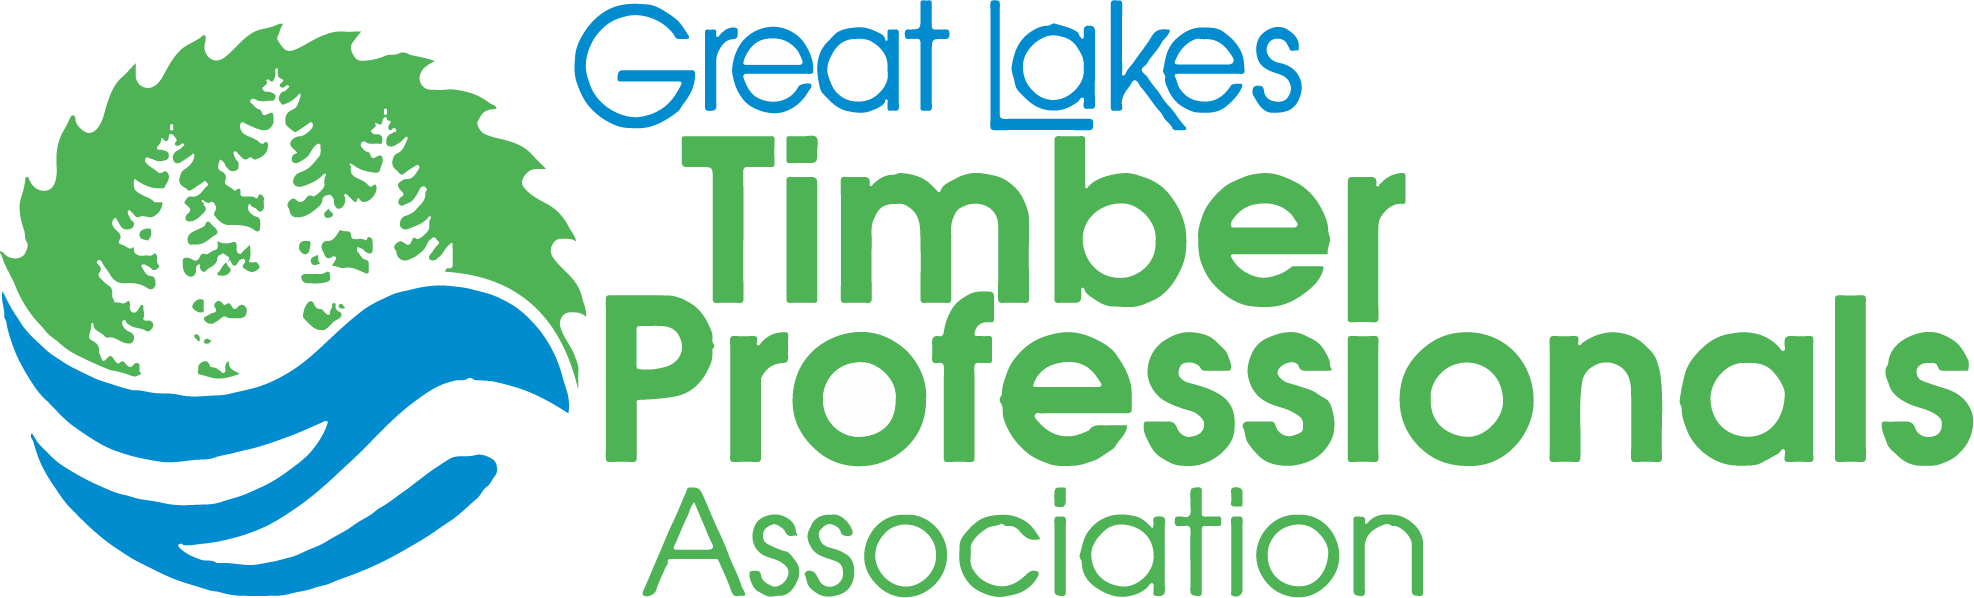 Great Lakes Timber Professionals Association Logo PNG image